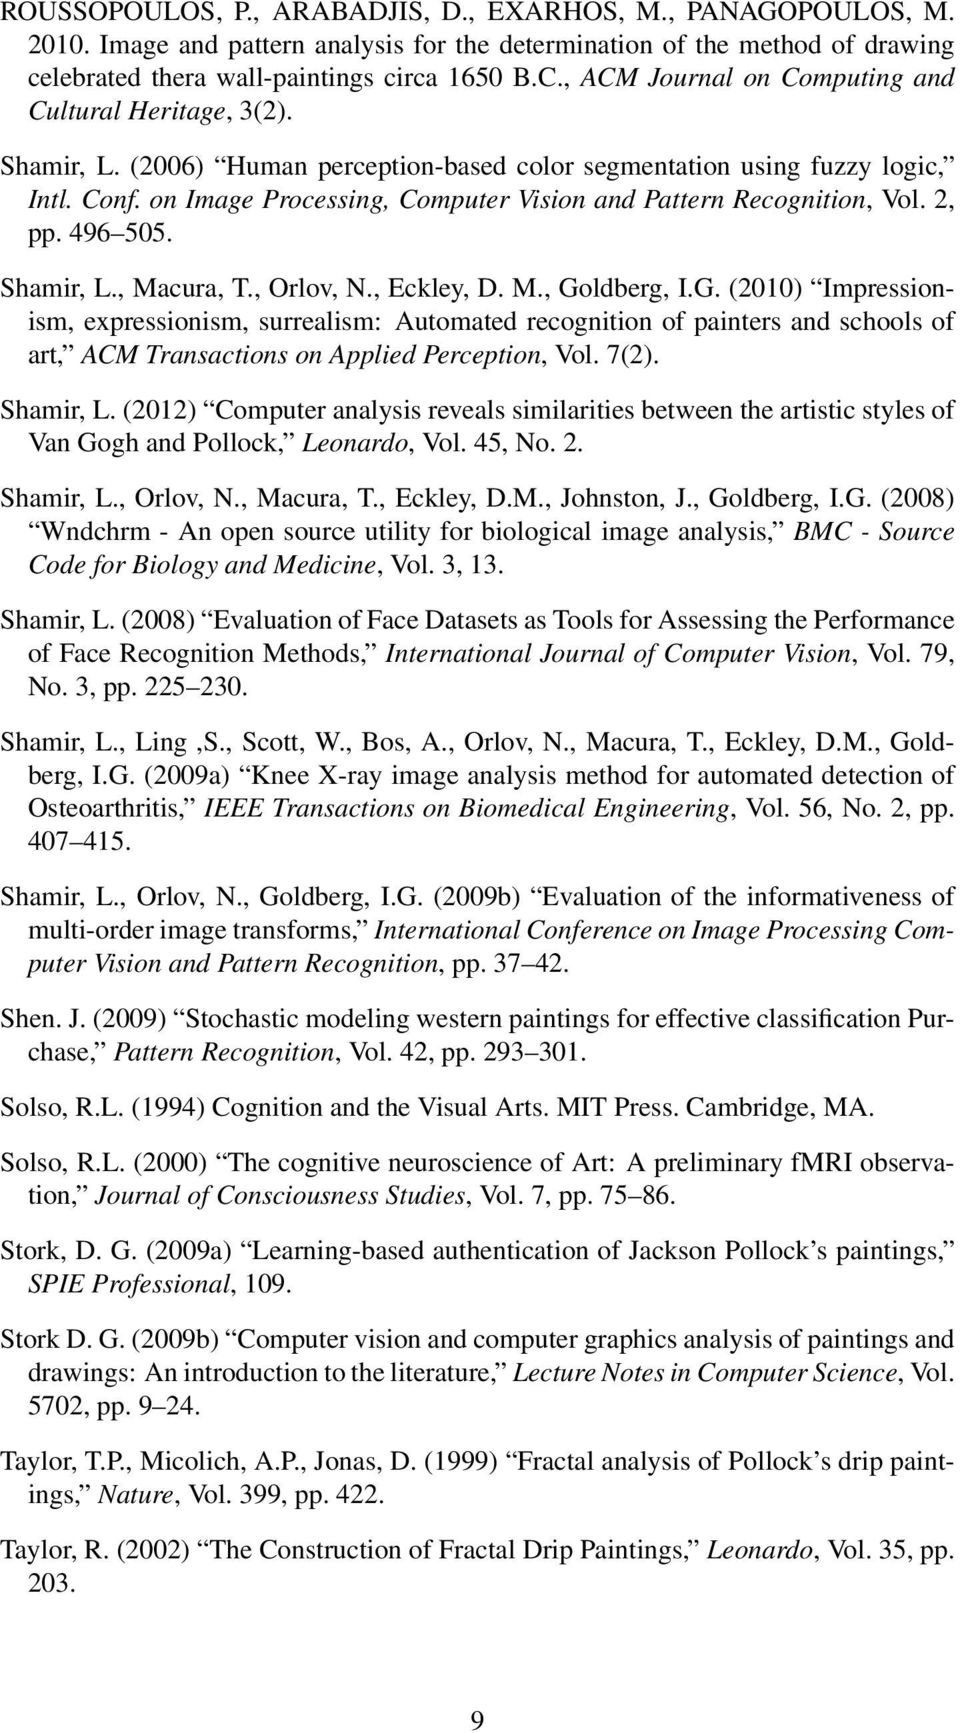 on Image Processing, Computer Vision and Pattern Recognition, Vol. 2, pp. 496 505. Shamir, L., Macura, T., Orlov, N., Eckley, D. M., Go